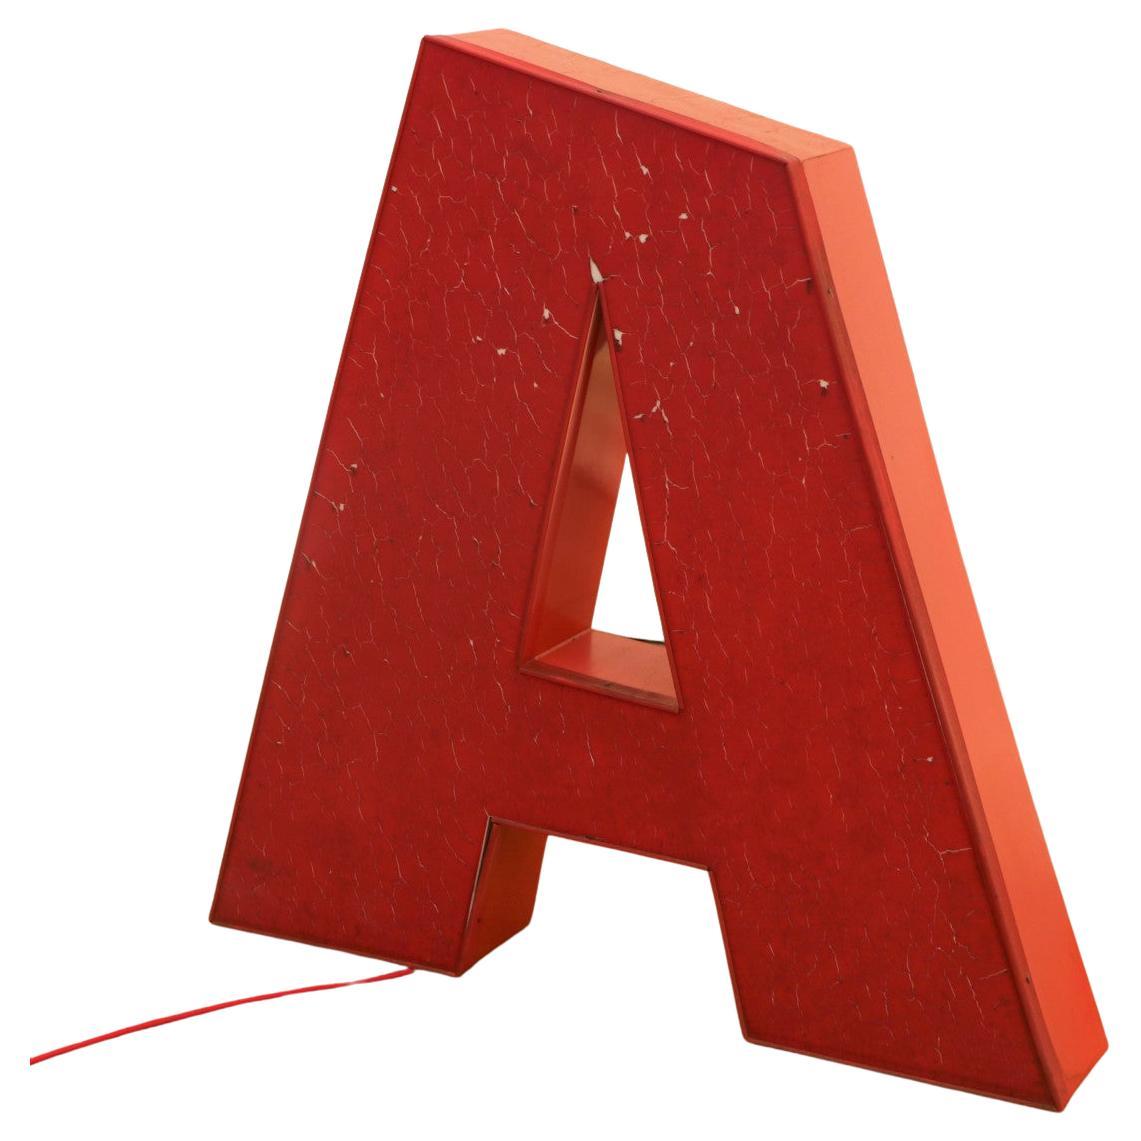 Eastern Bloc Vintage Lluminated Letter a in the Form of a Floor Night Lamp, 1970 For Sale